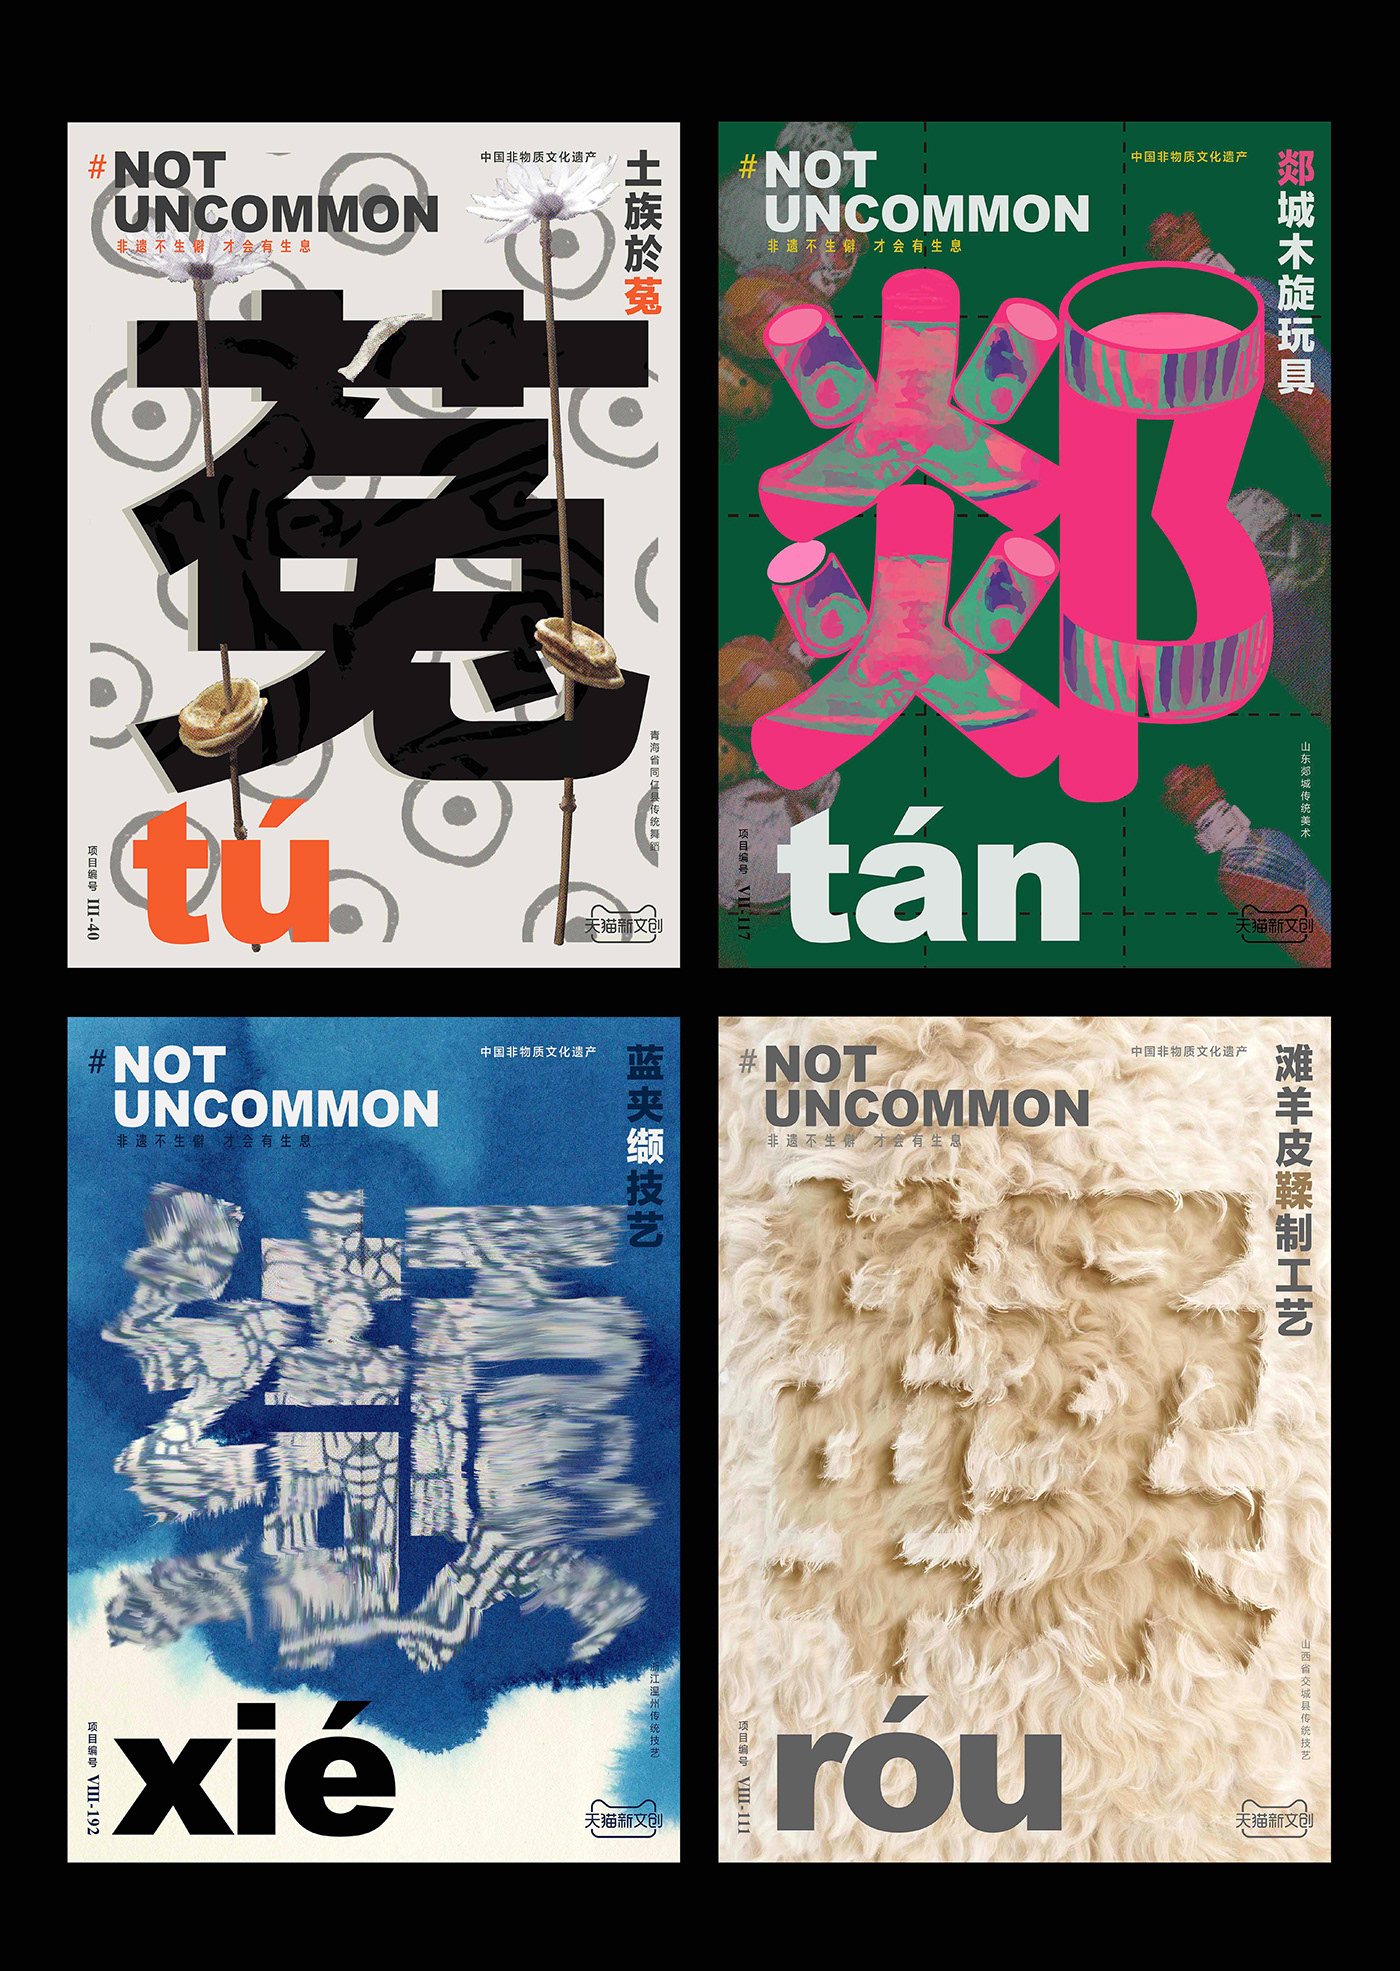 Advertising  alibaba Art Director china design intangible heritage posters print tmall typeface deisng